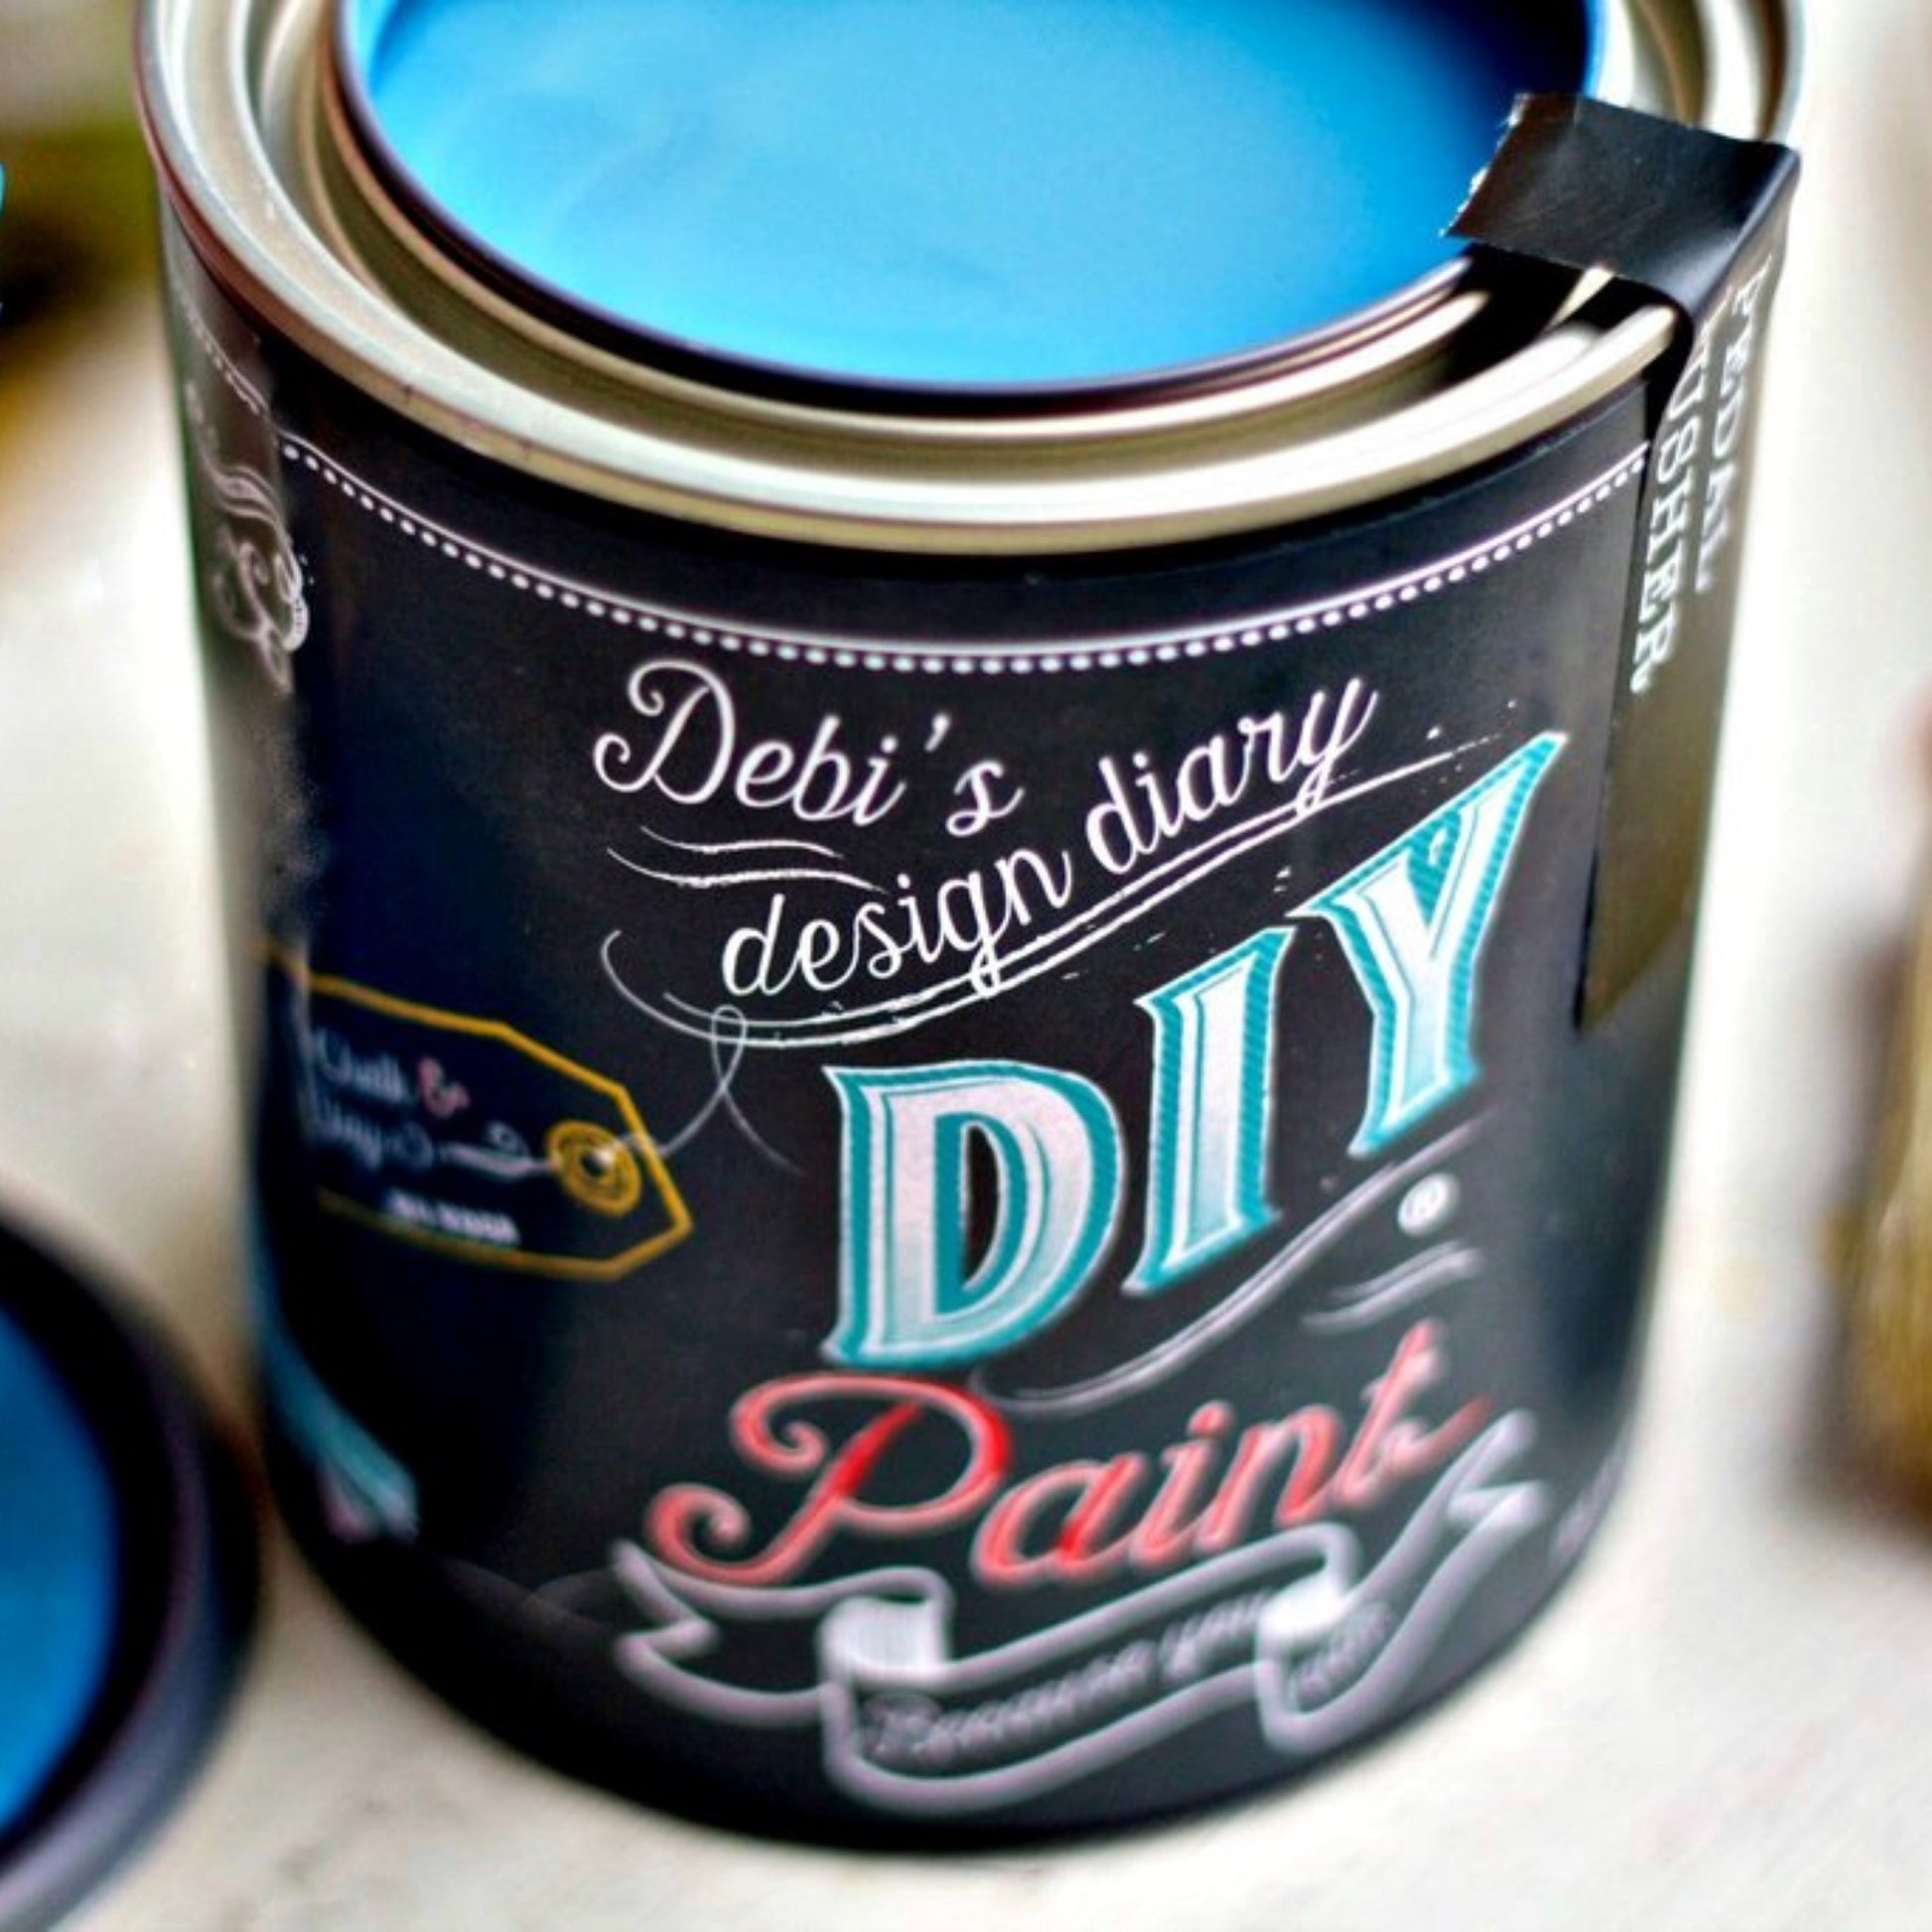 Pedal Pusher by  Debi's Design Diary DIY Paint available at Milton's Daughter